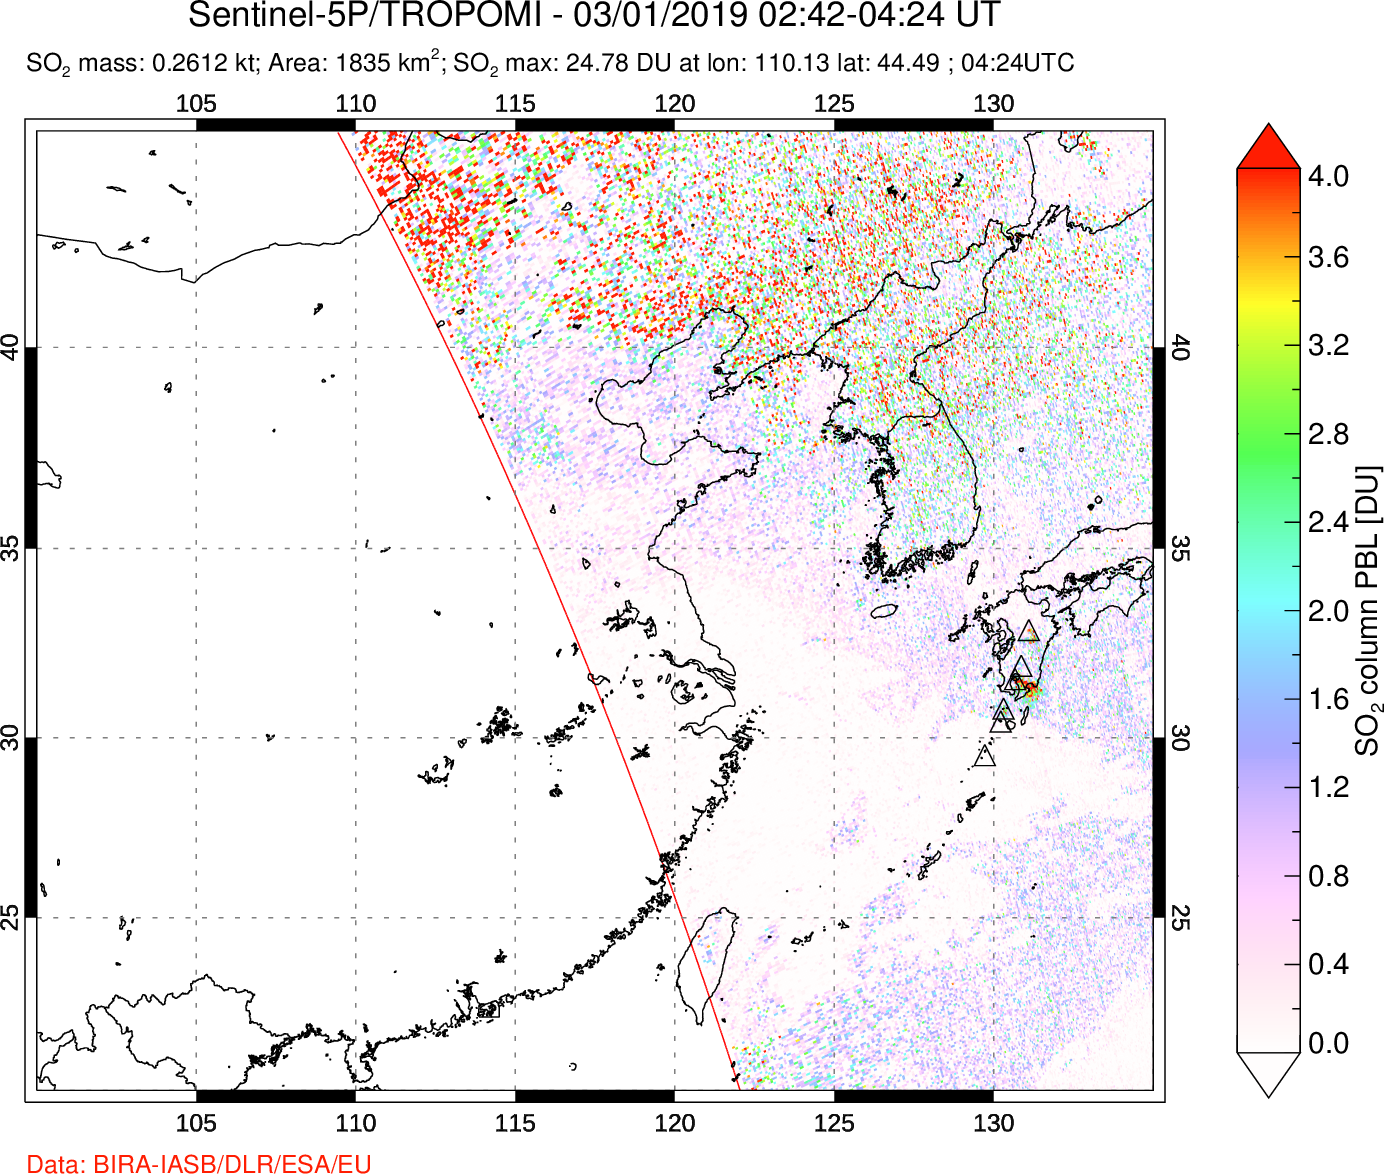 A sulfur dioxide image over Eastern China on Mar 01, 2019.